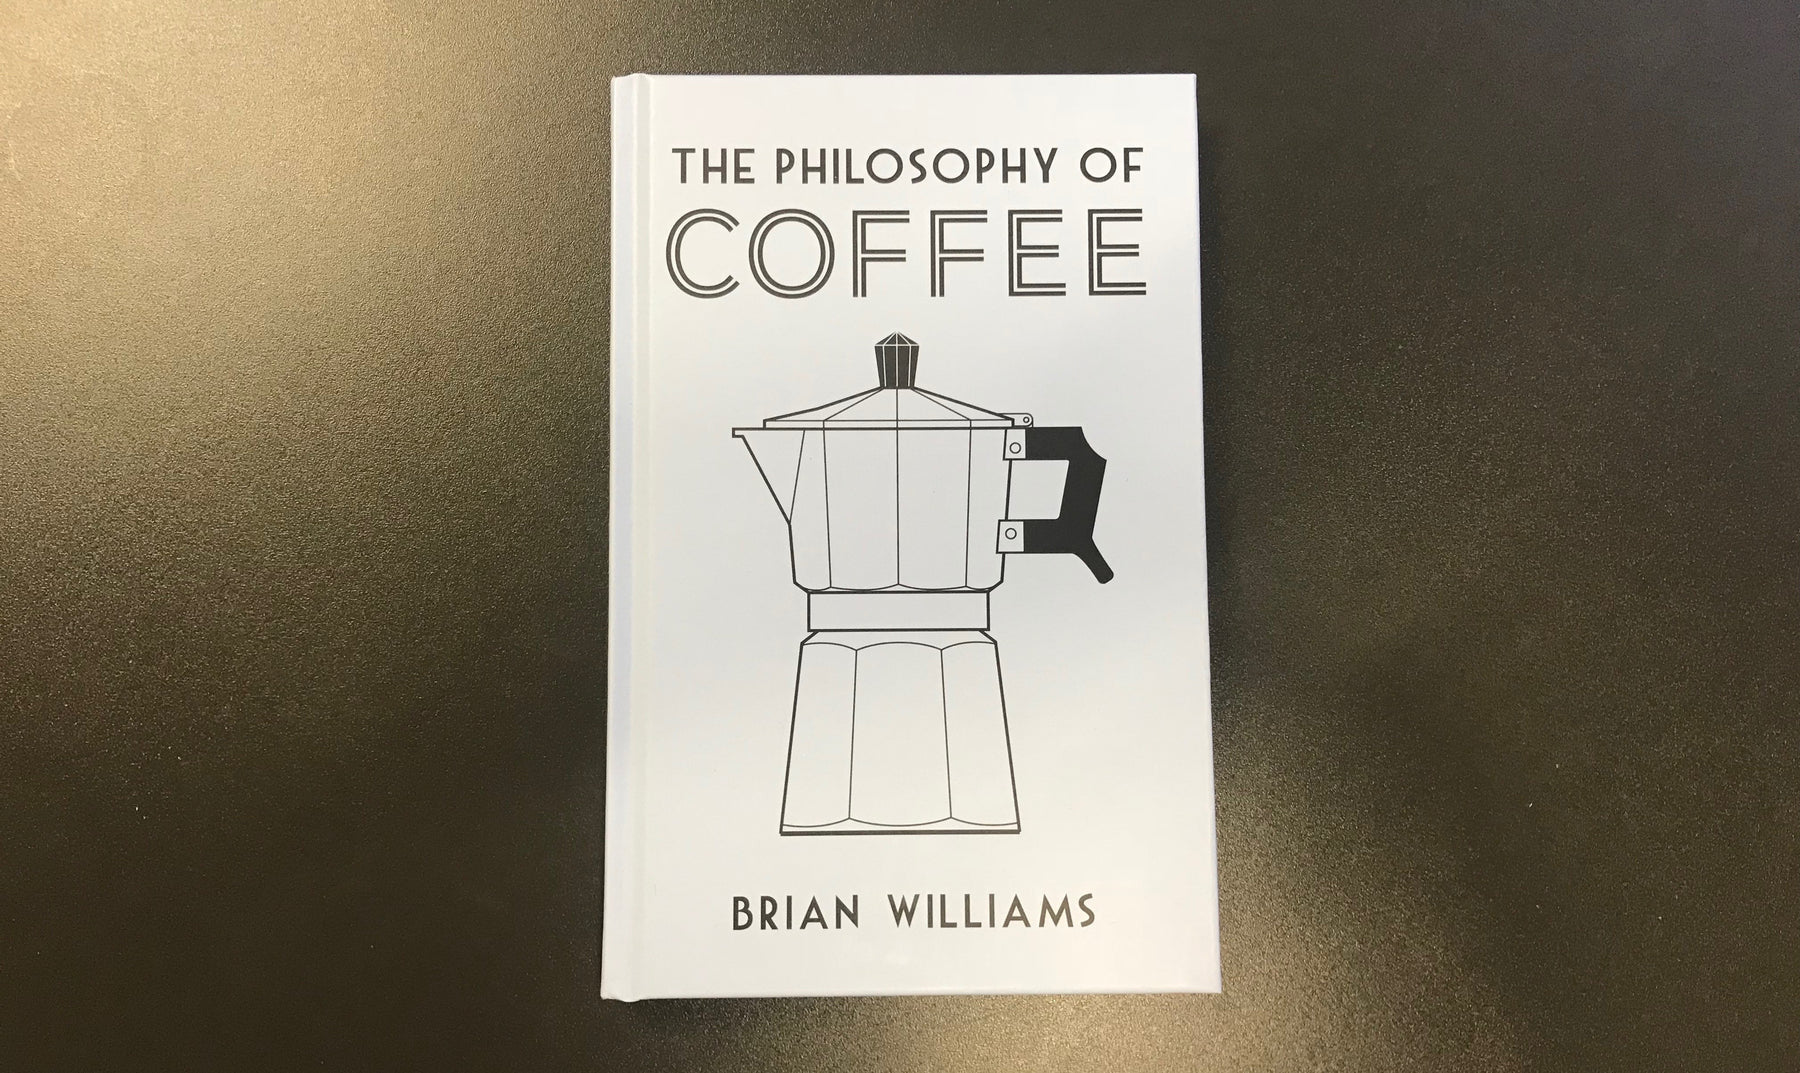 Brian's Philosophy of Coffee